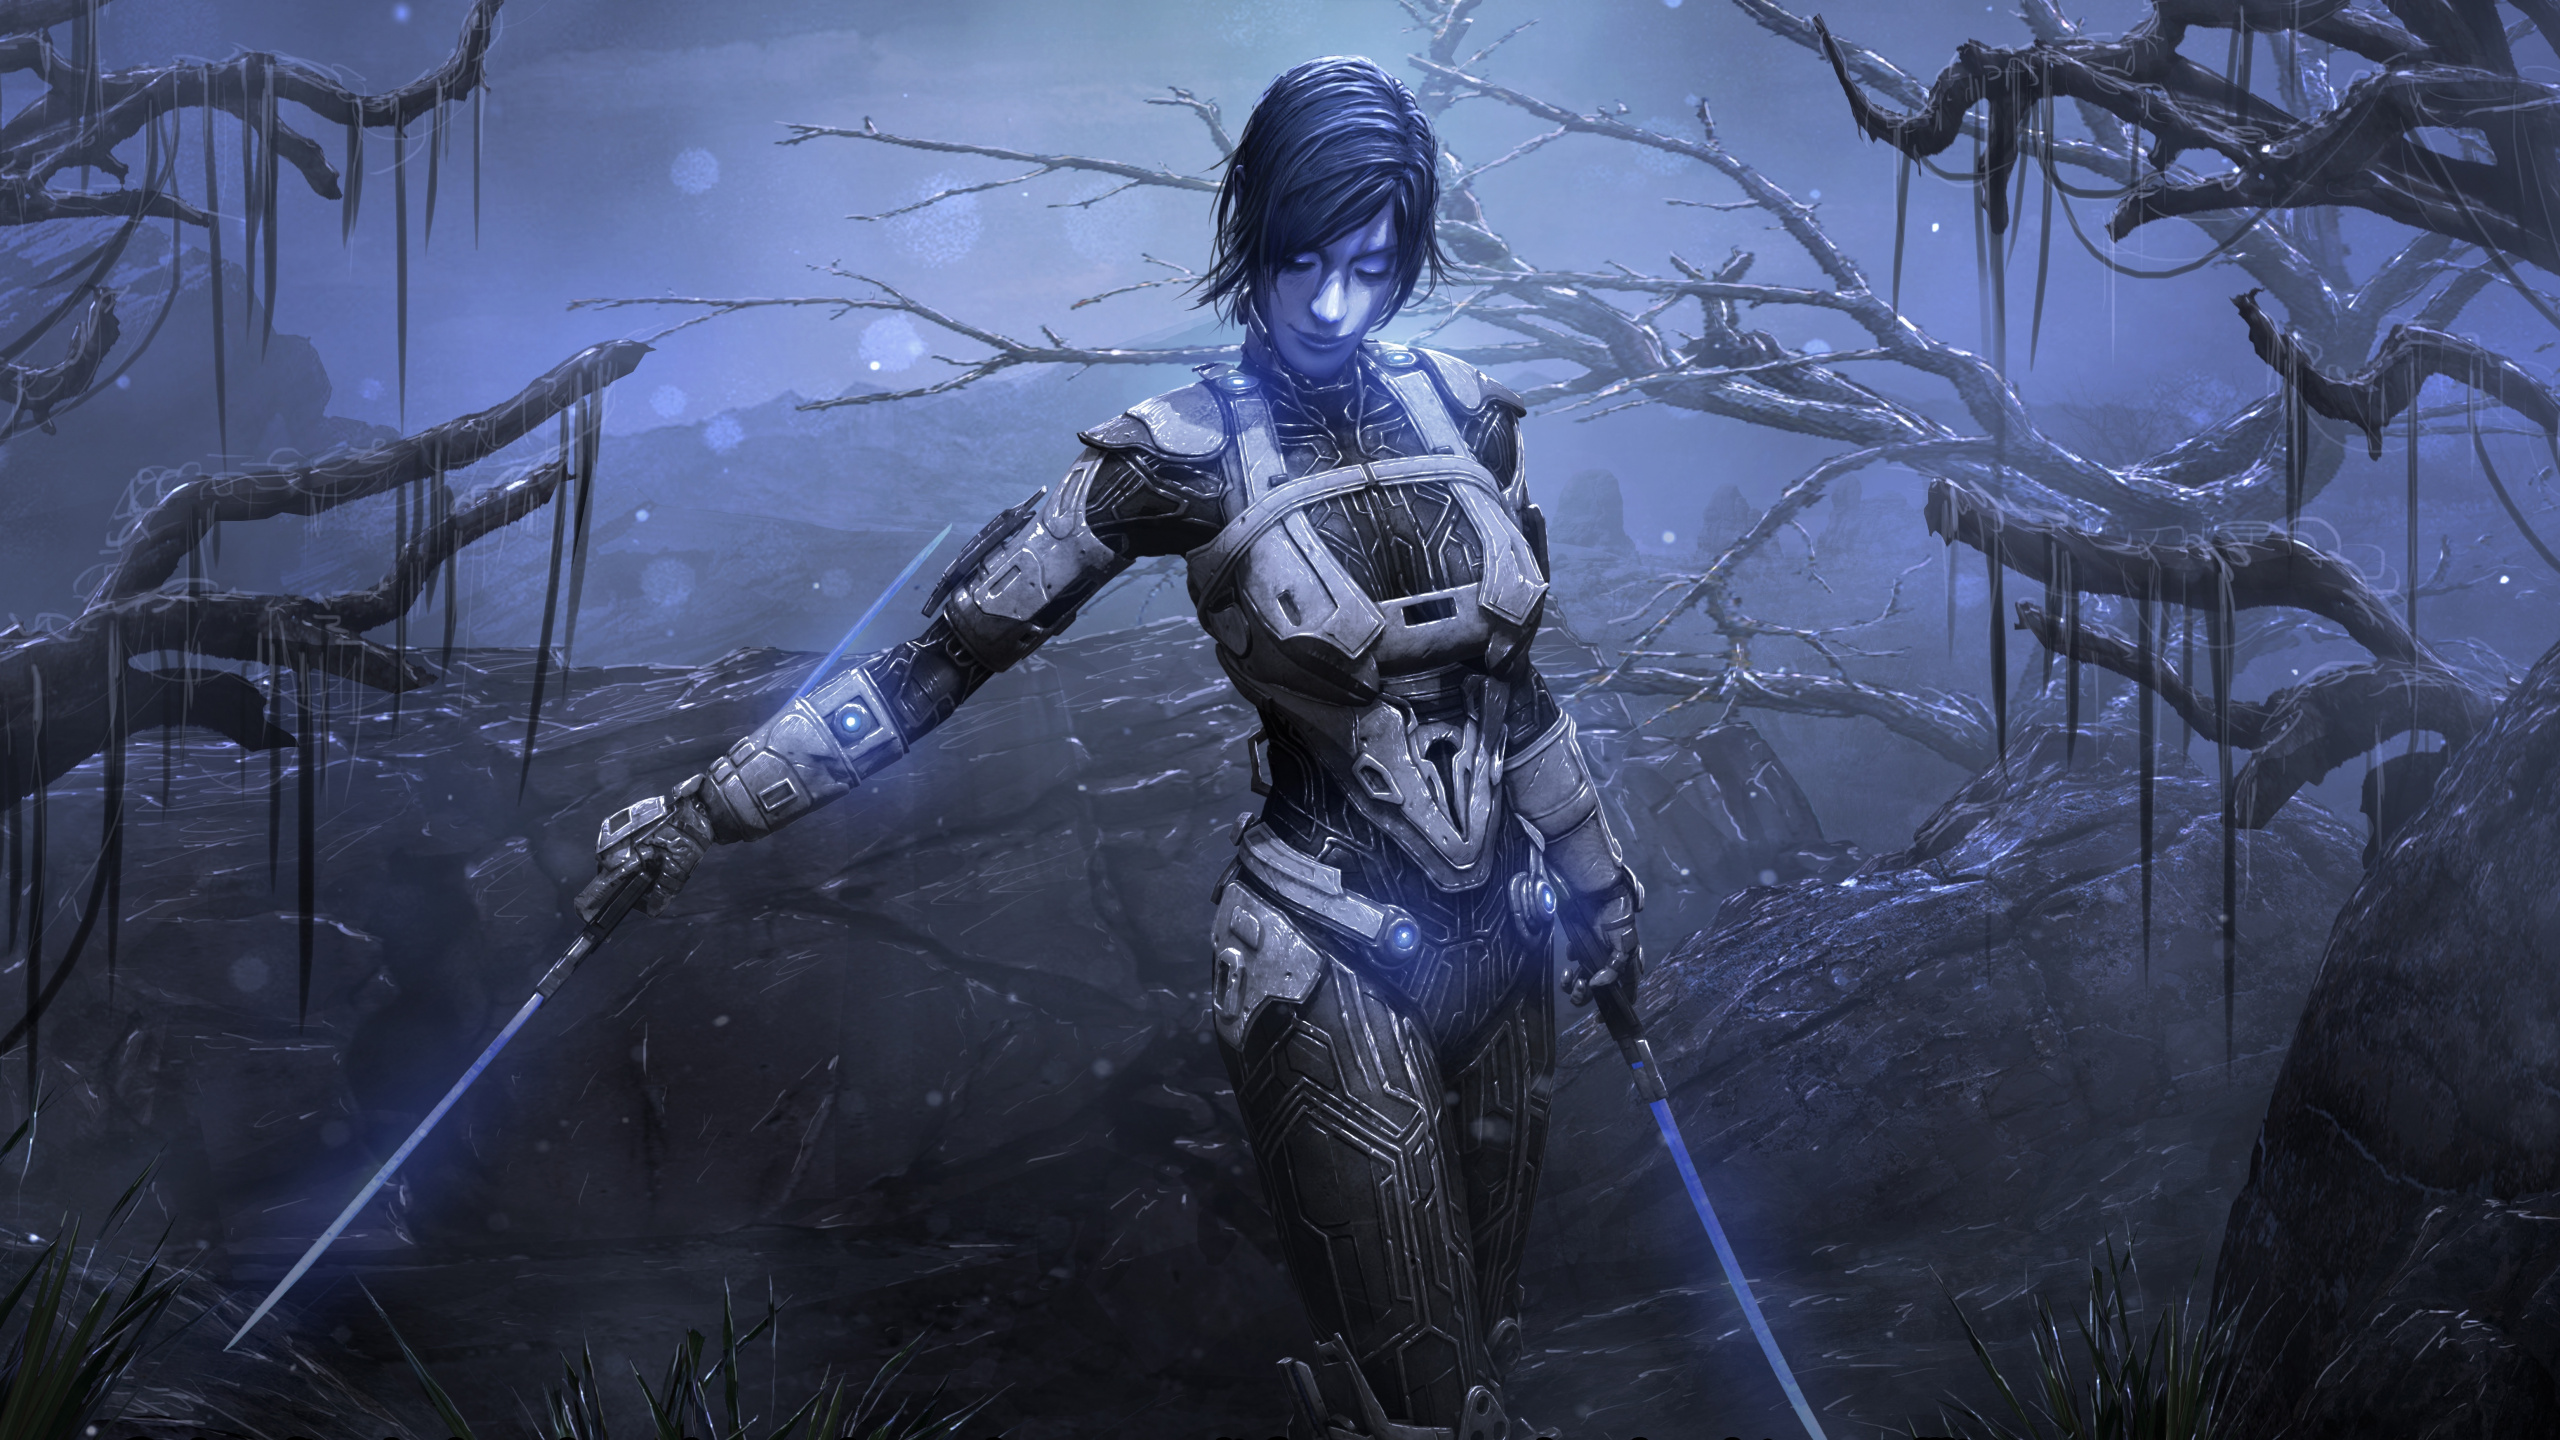 Woman in Black and Blue Suit Holding Black and Blue Weapon. Wallpaper in 2560x1440 Resolution